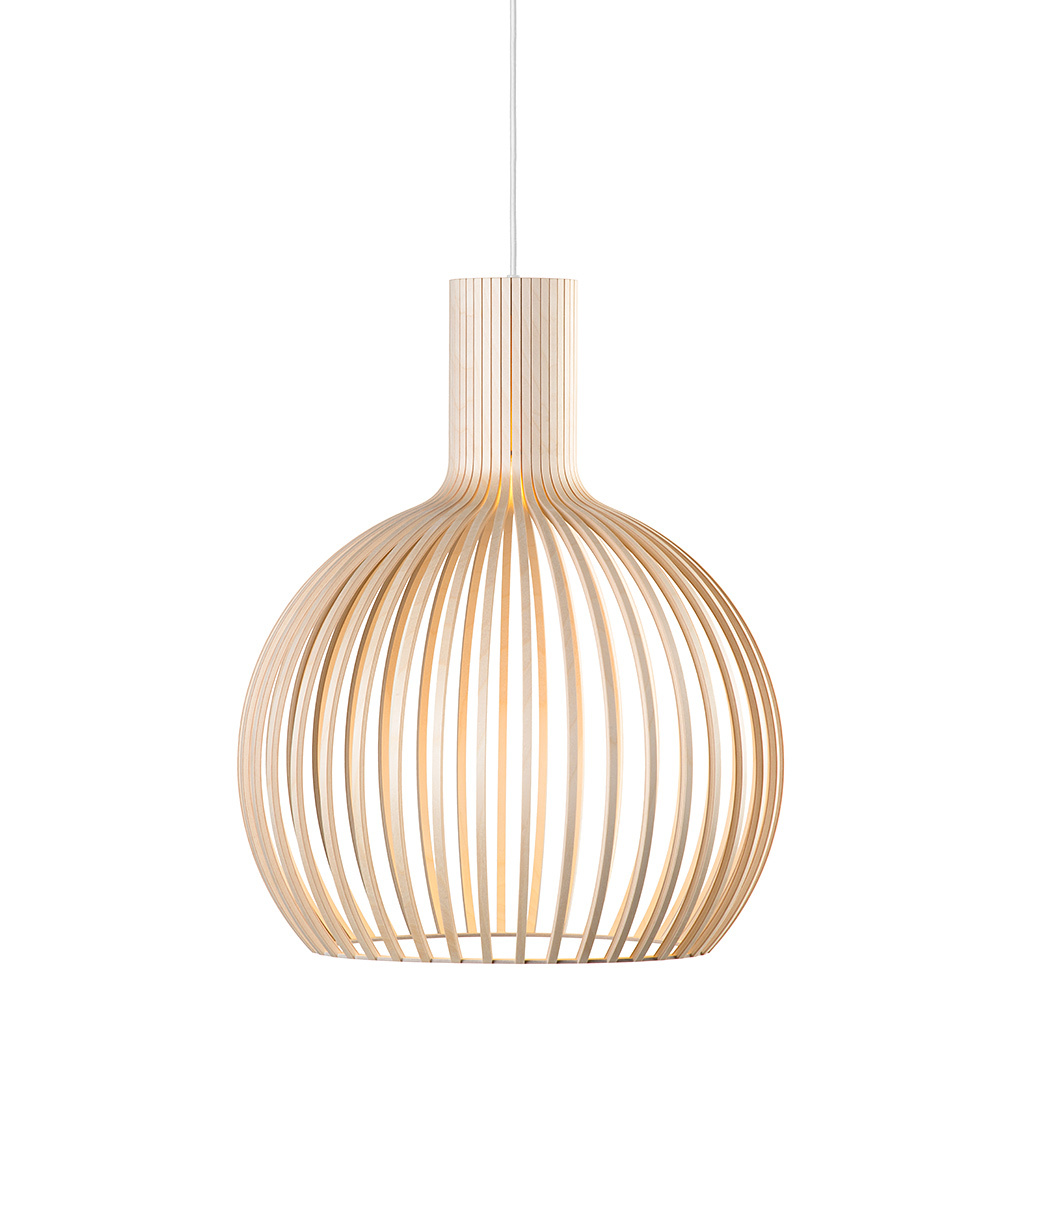 Octo Small 4241 pendant lamp is available in natural birch